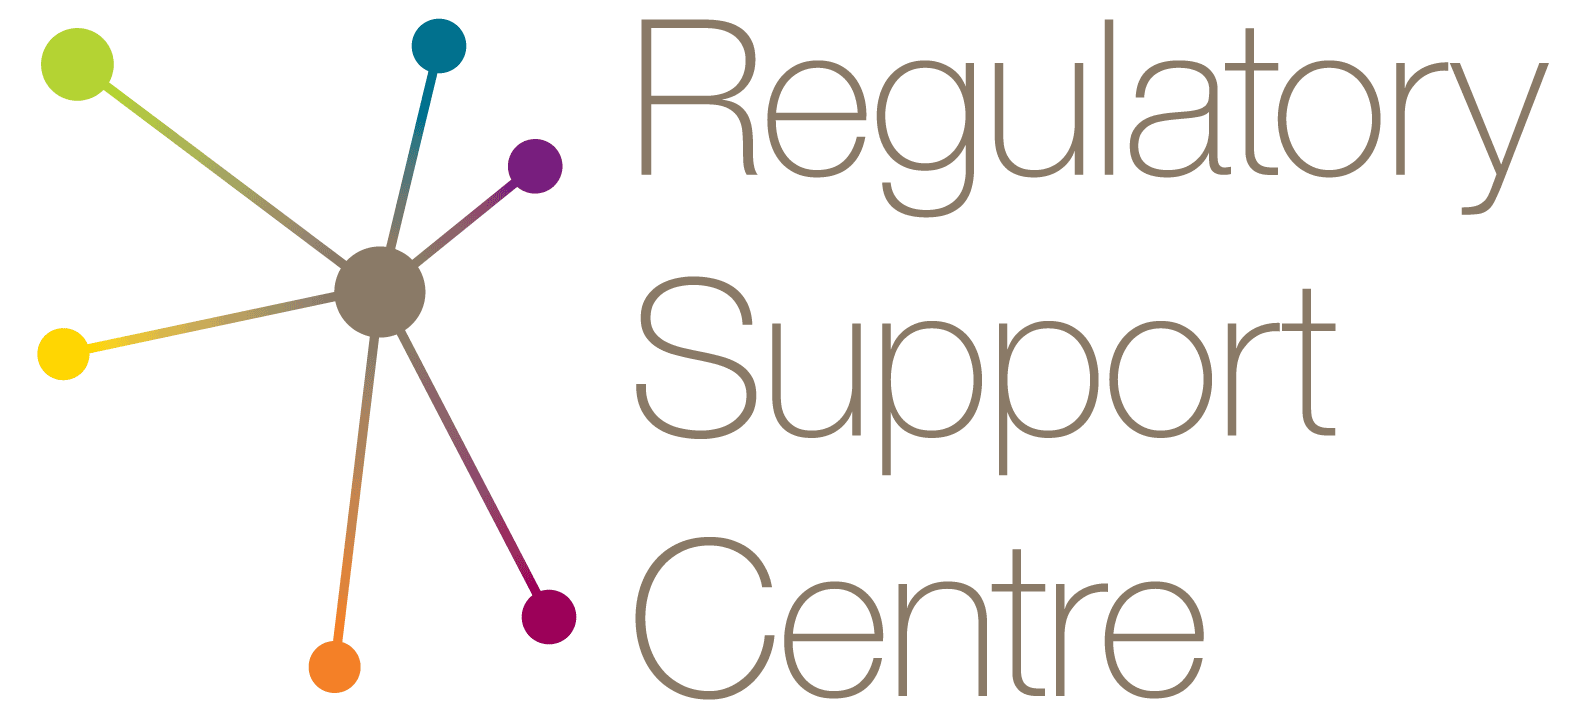 Medical Research Council Regulatory Support Centre logo